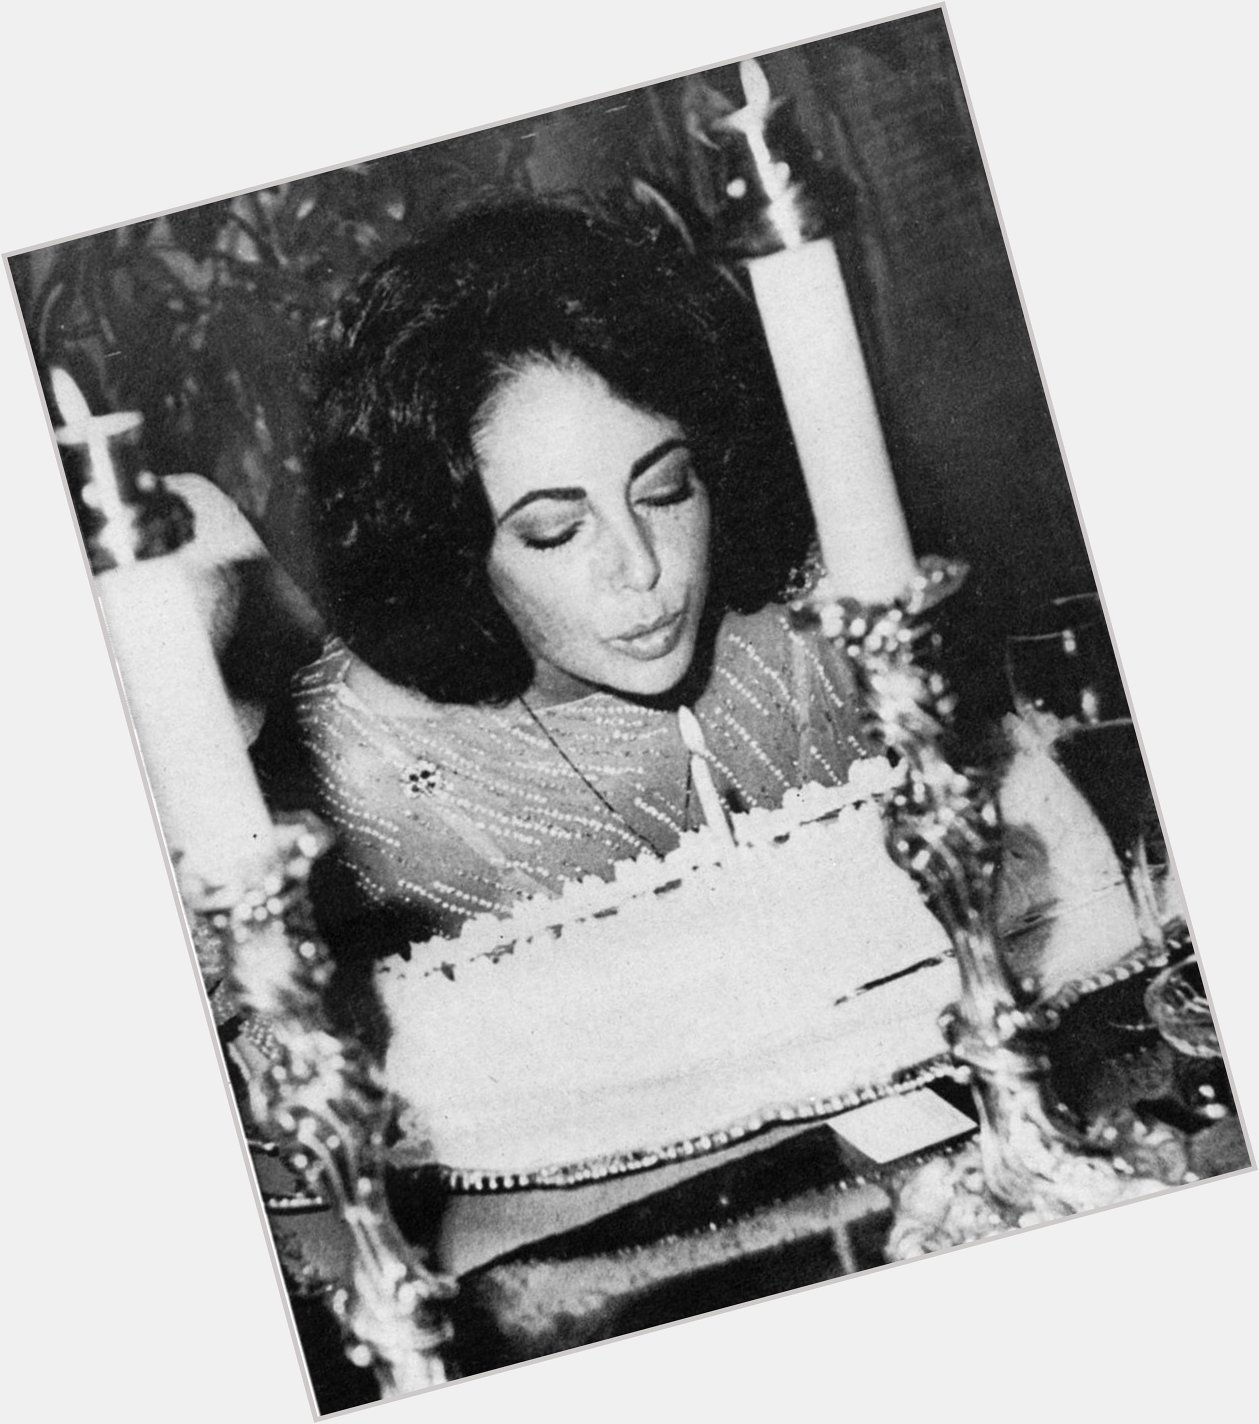 Happy birthday remembrance to the one and only Elizabeth Taylor who was born on this day in 1932. 